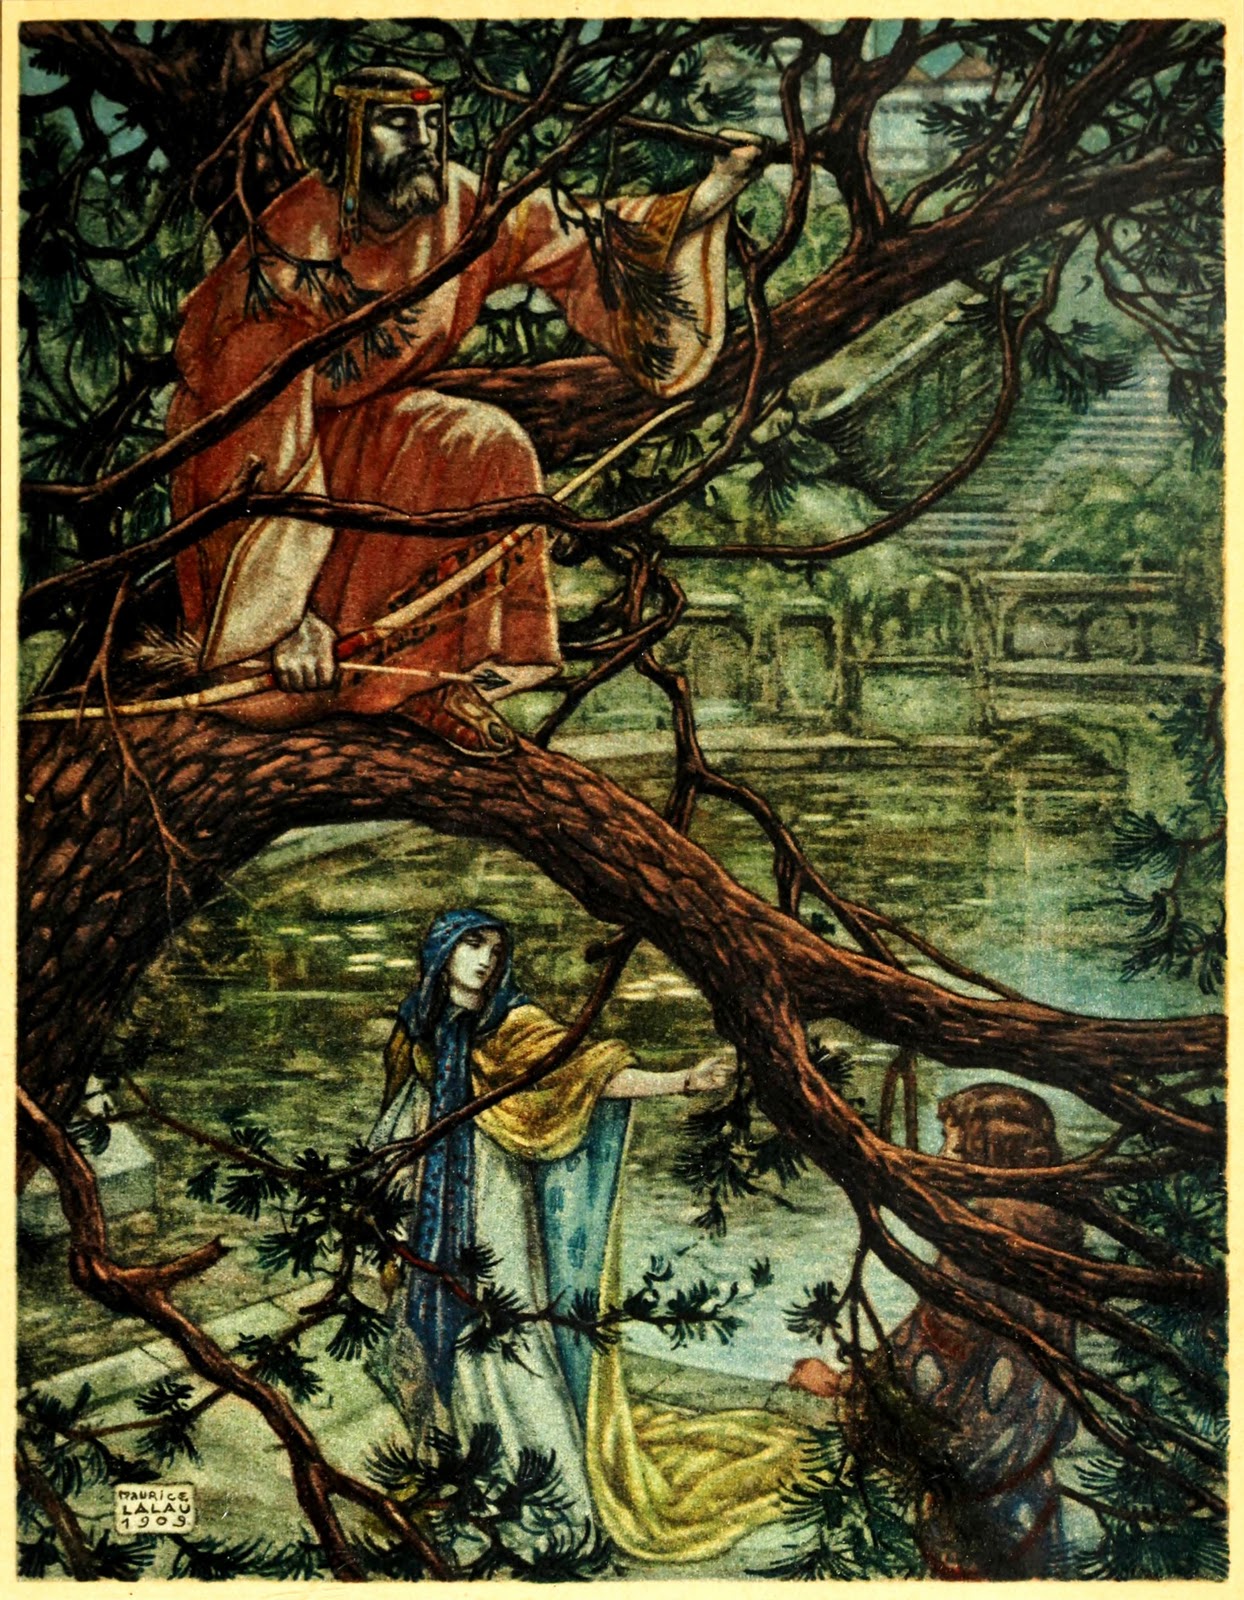 romance of tristan and iseult